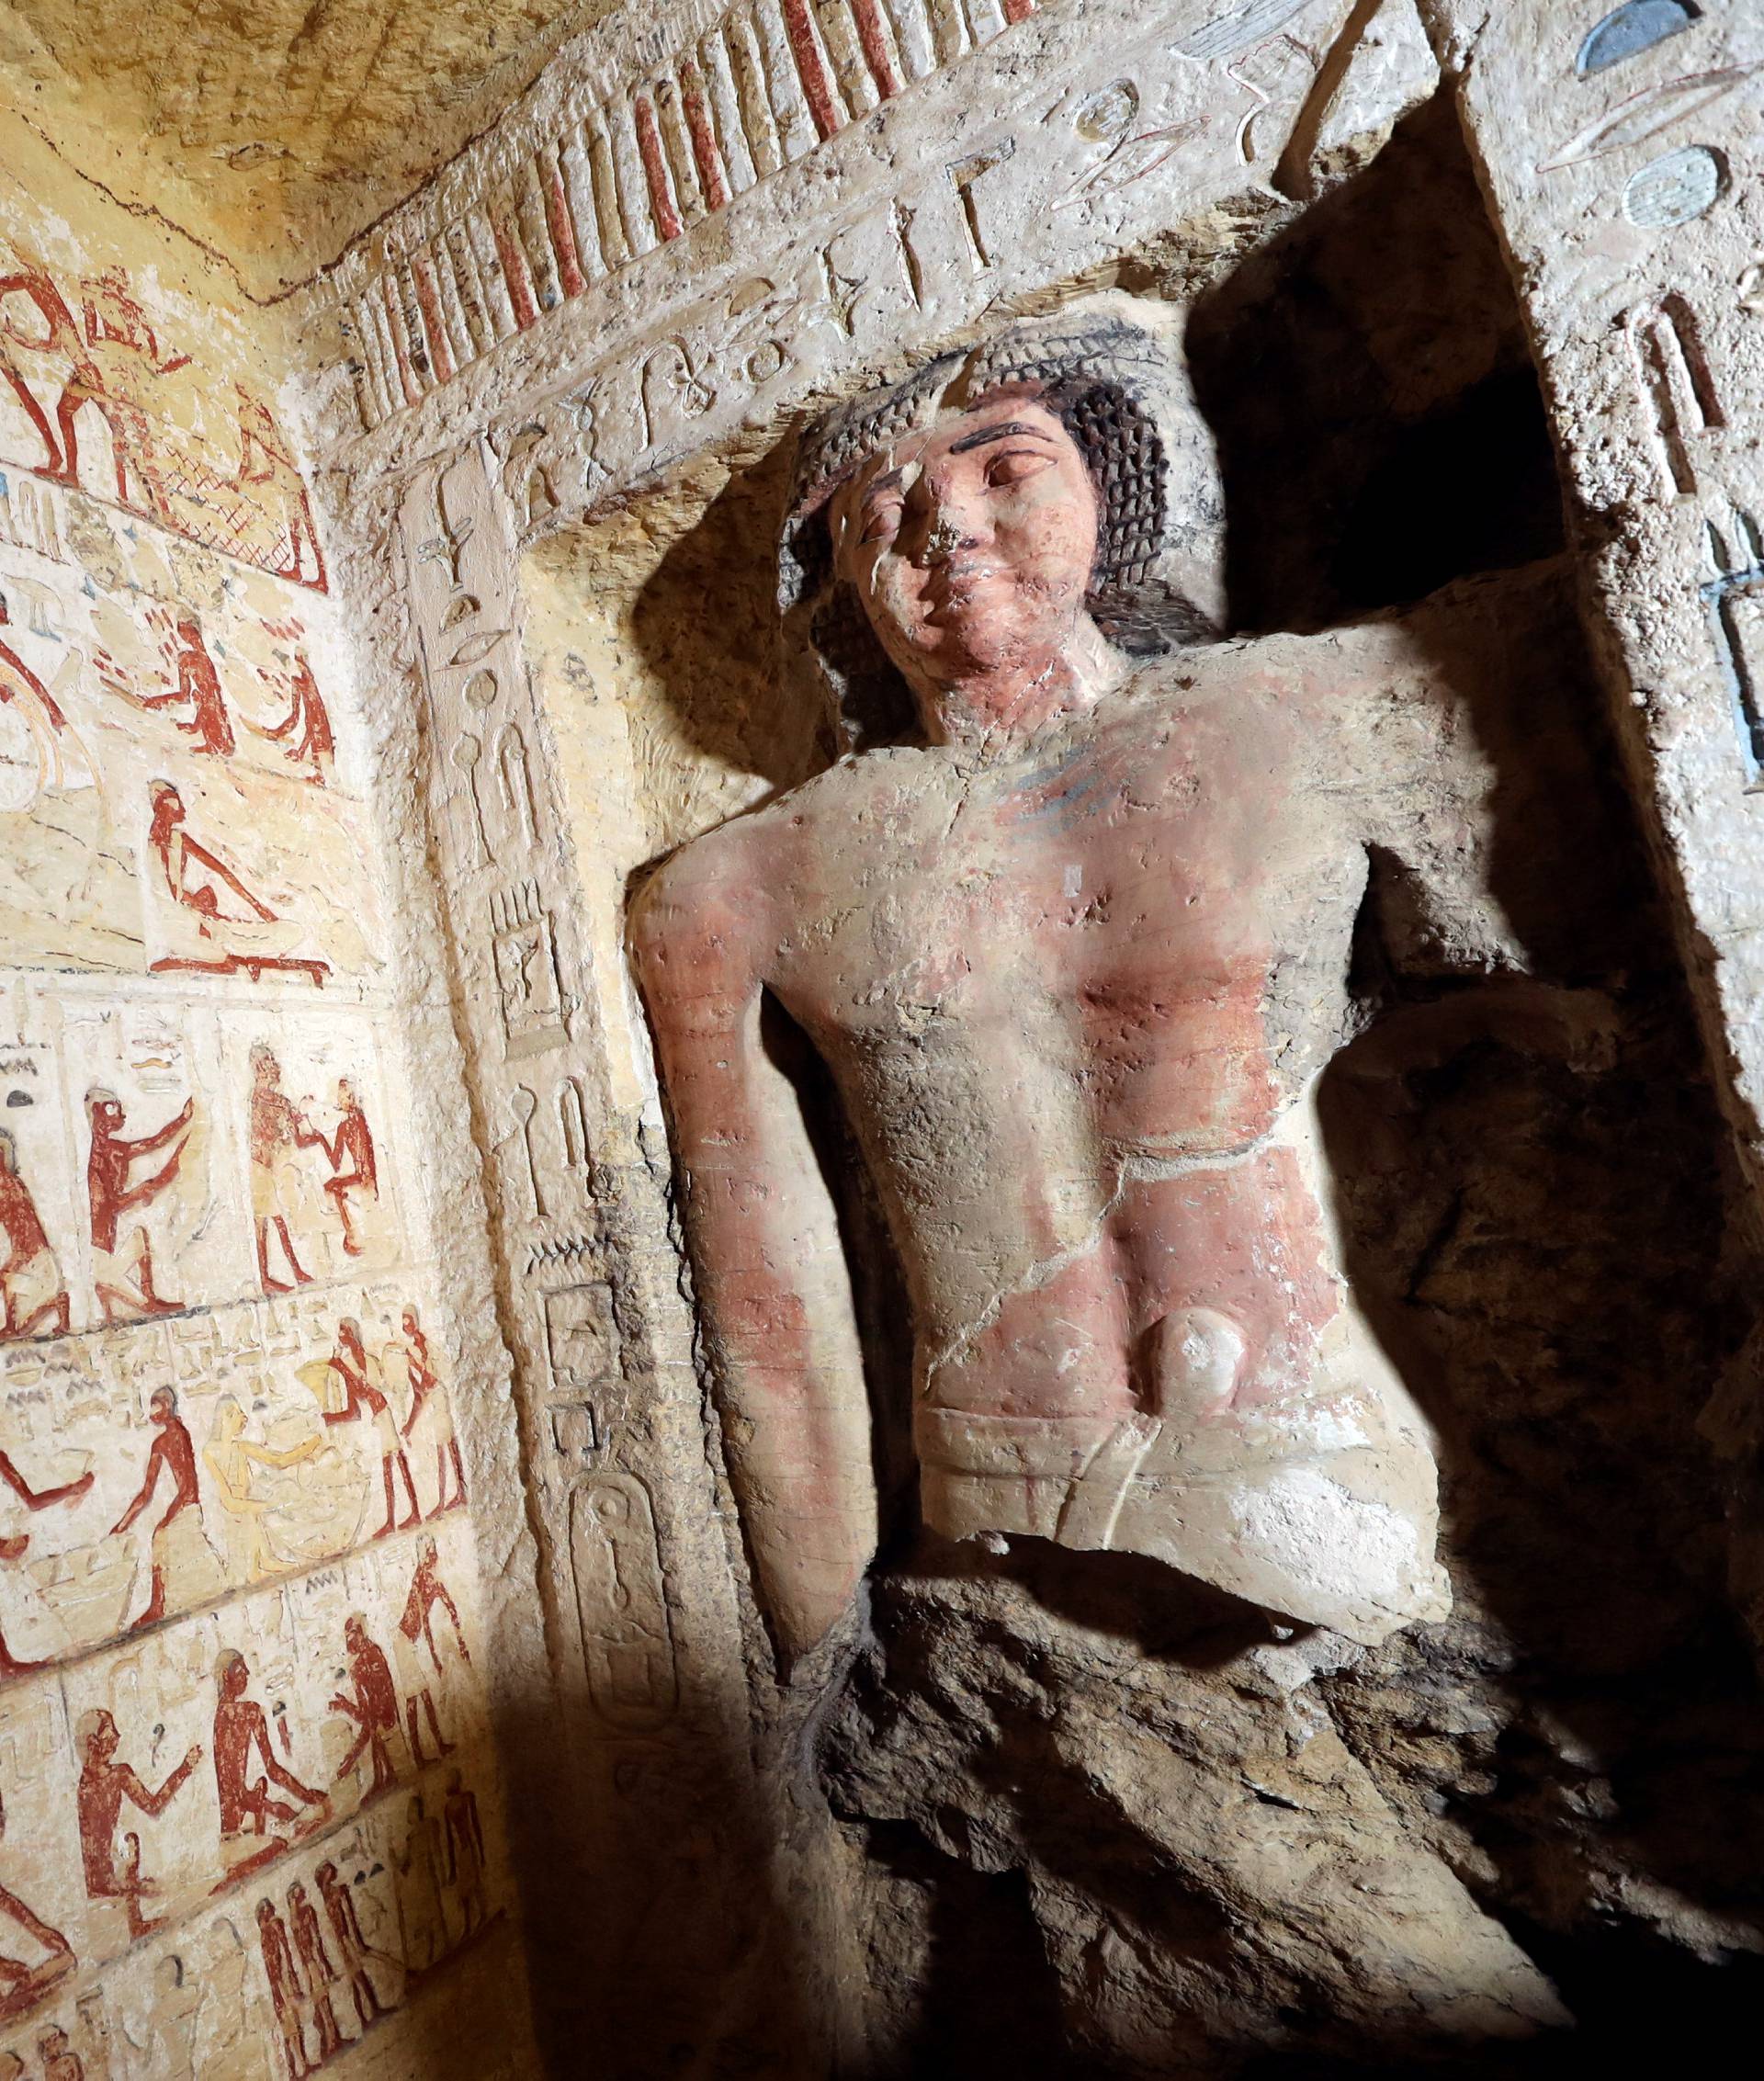 A statue is seen inside the newly-discovered tomb of 'Wahtye', which dates from the rule of King Neferirkare Kakai, at the Saqqara area near its necropolis, in Giza